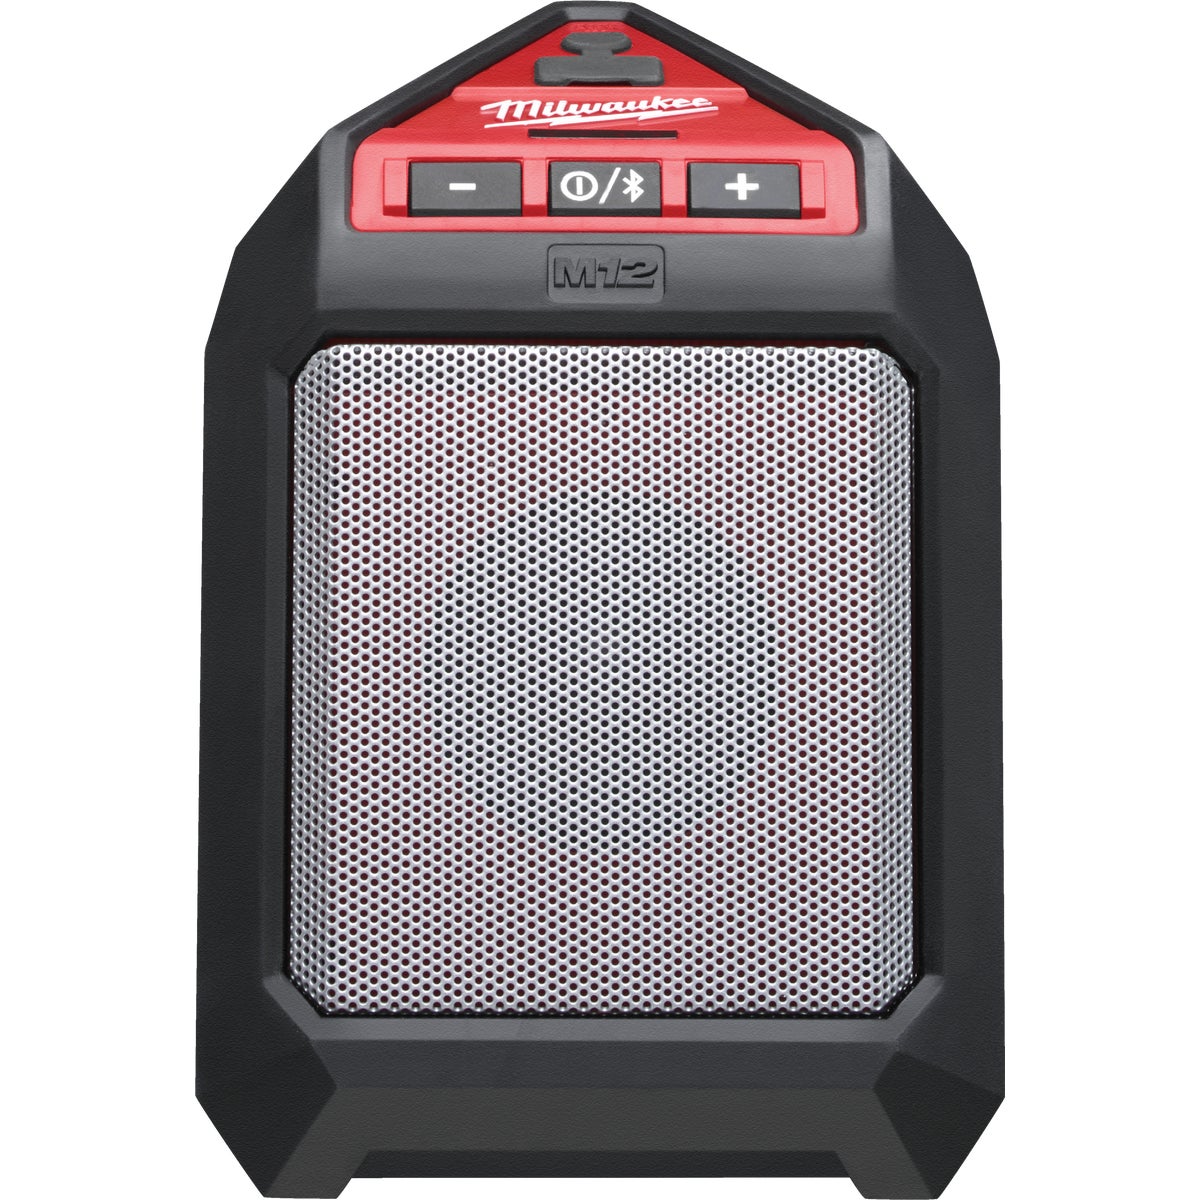 Item 303660, The M12 wireless jobsite speaker uses Bluetooth to pair with portable 